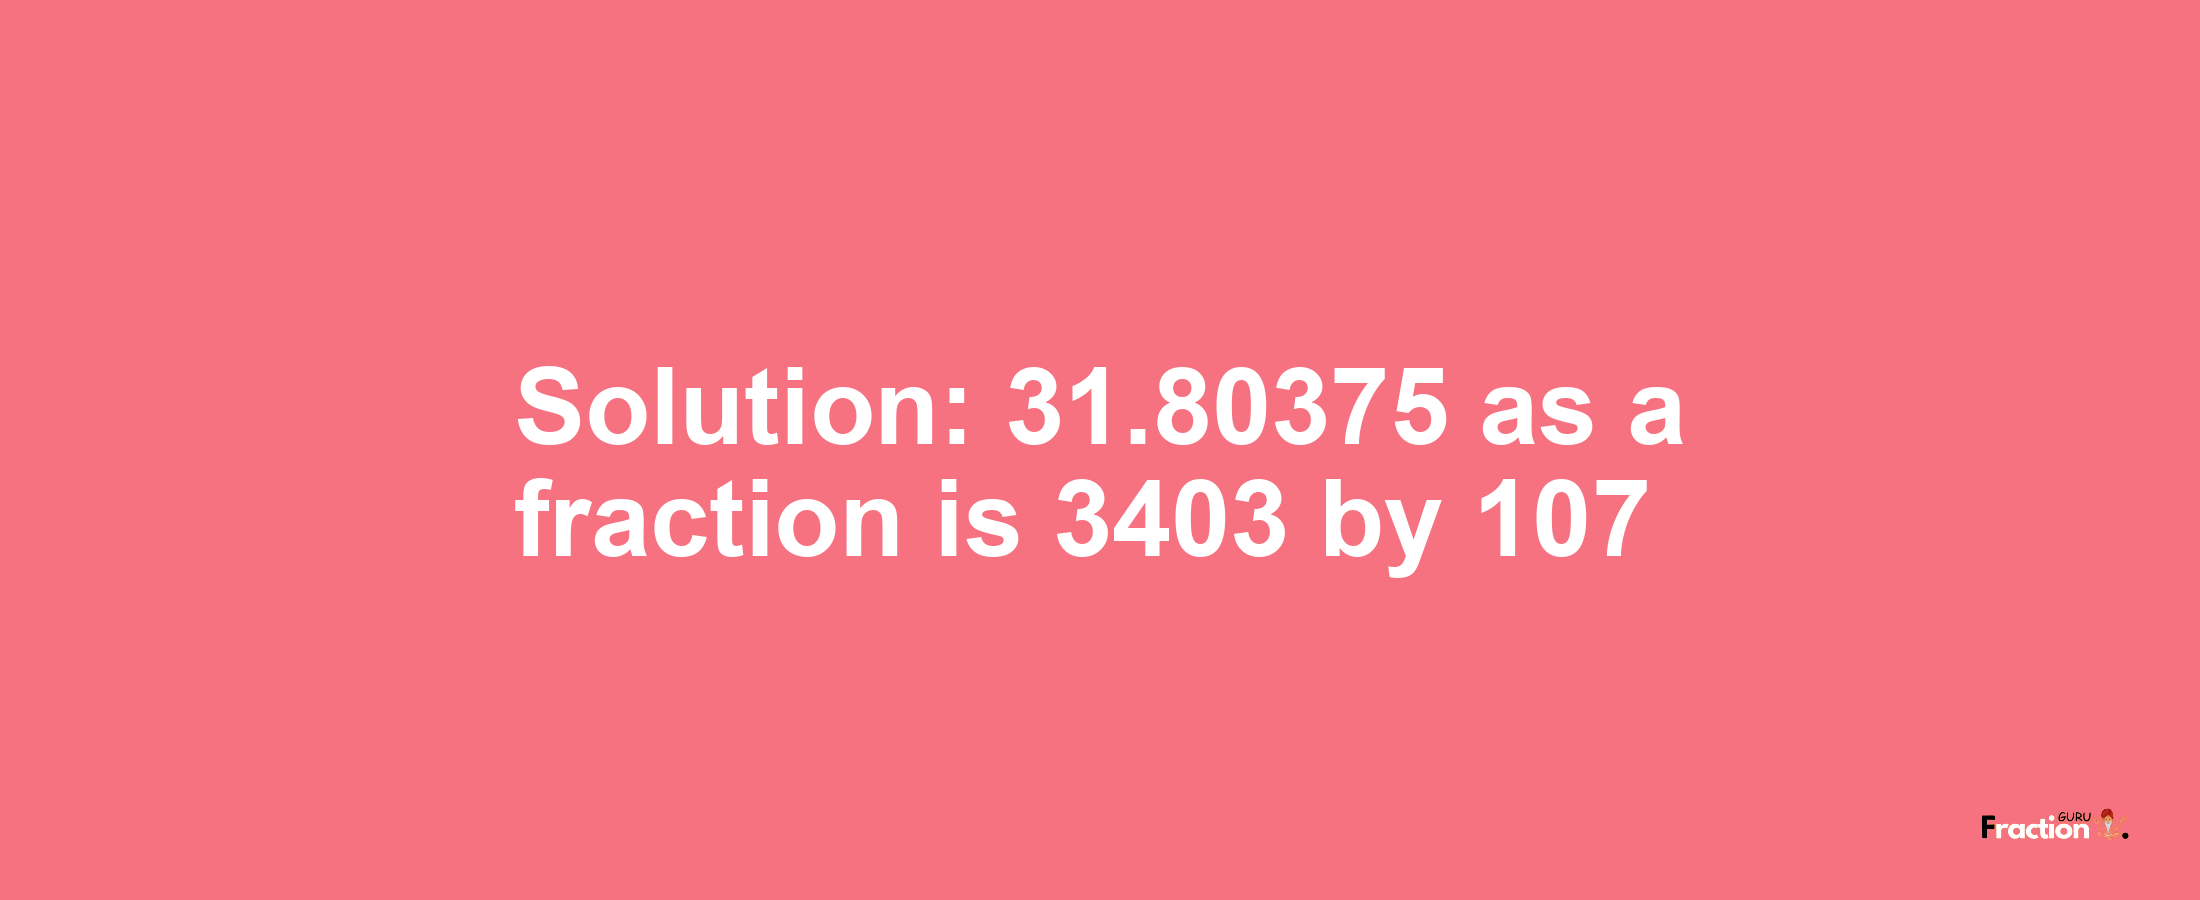 Solution:31.80375 as a fraction is 3403/107